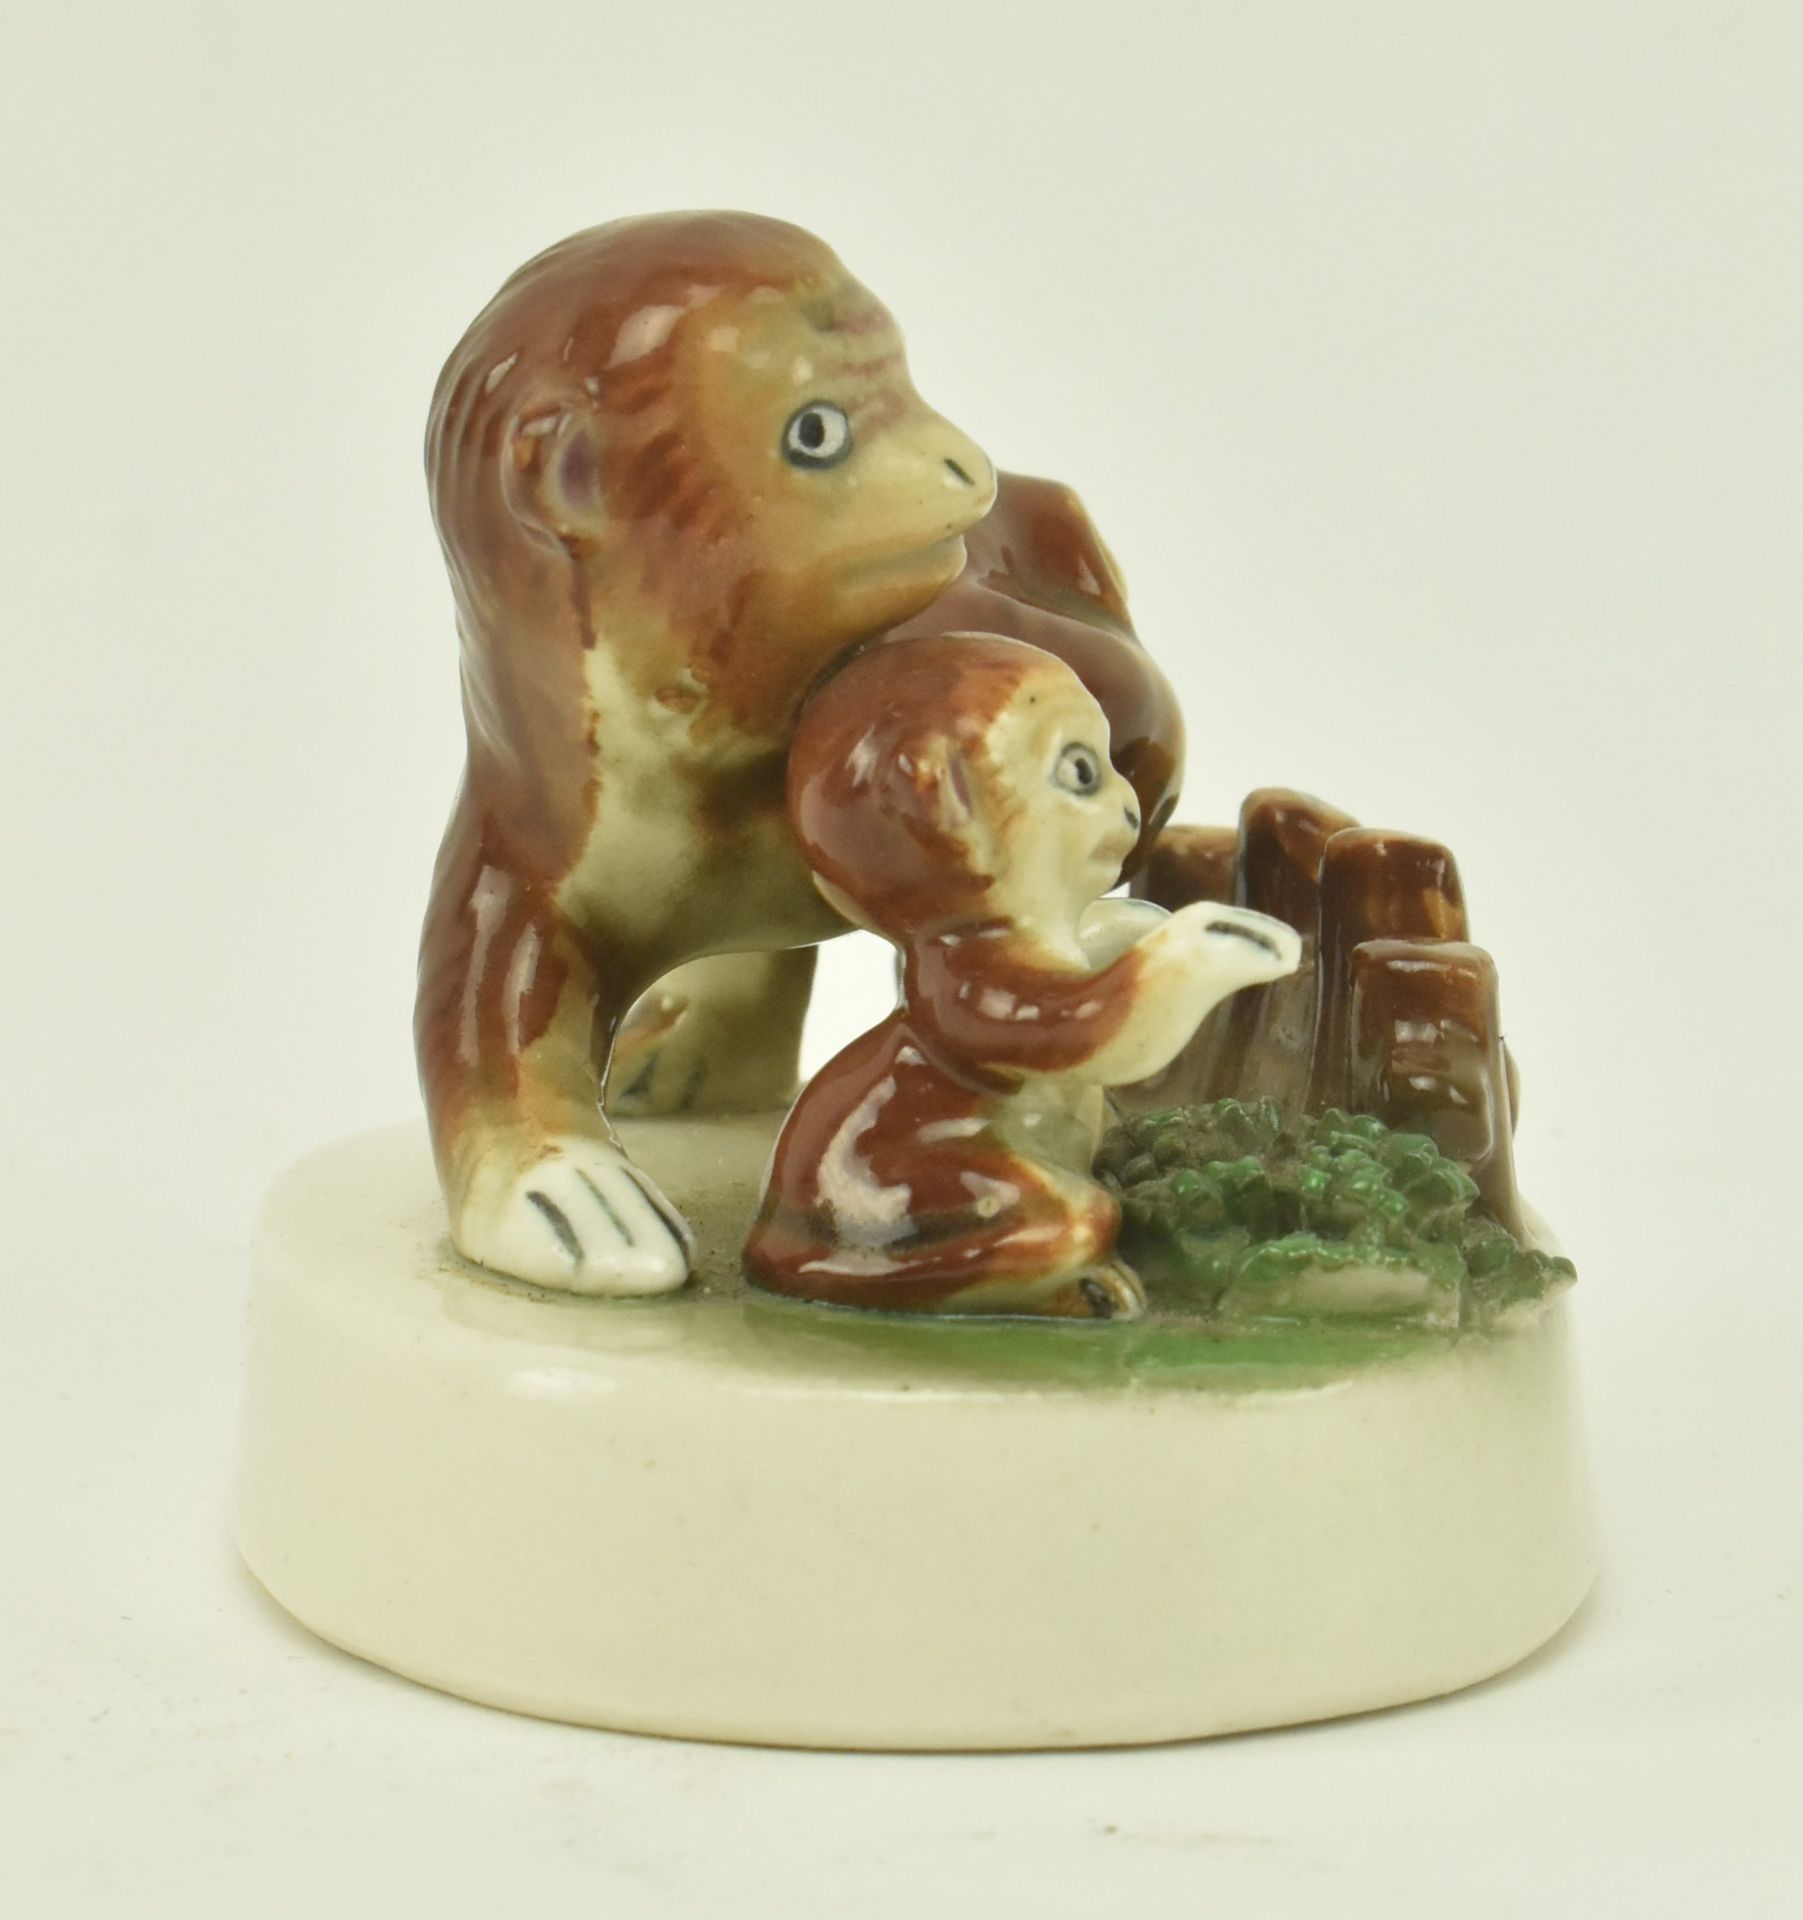 VICTORIAN STAFFORDSHIRE SCENE OF MONKEY AND CUB - Image 2 of 6